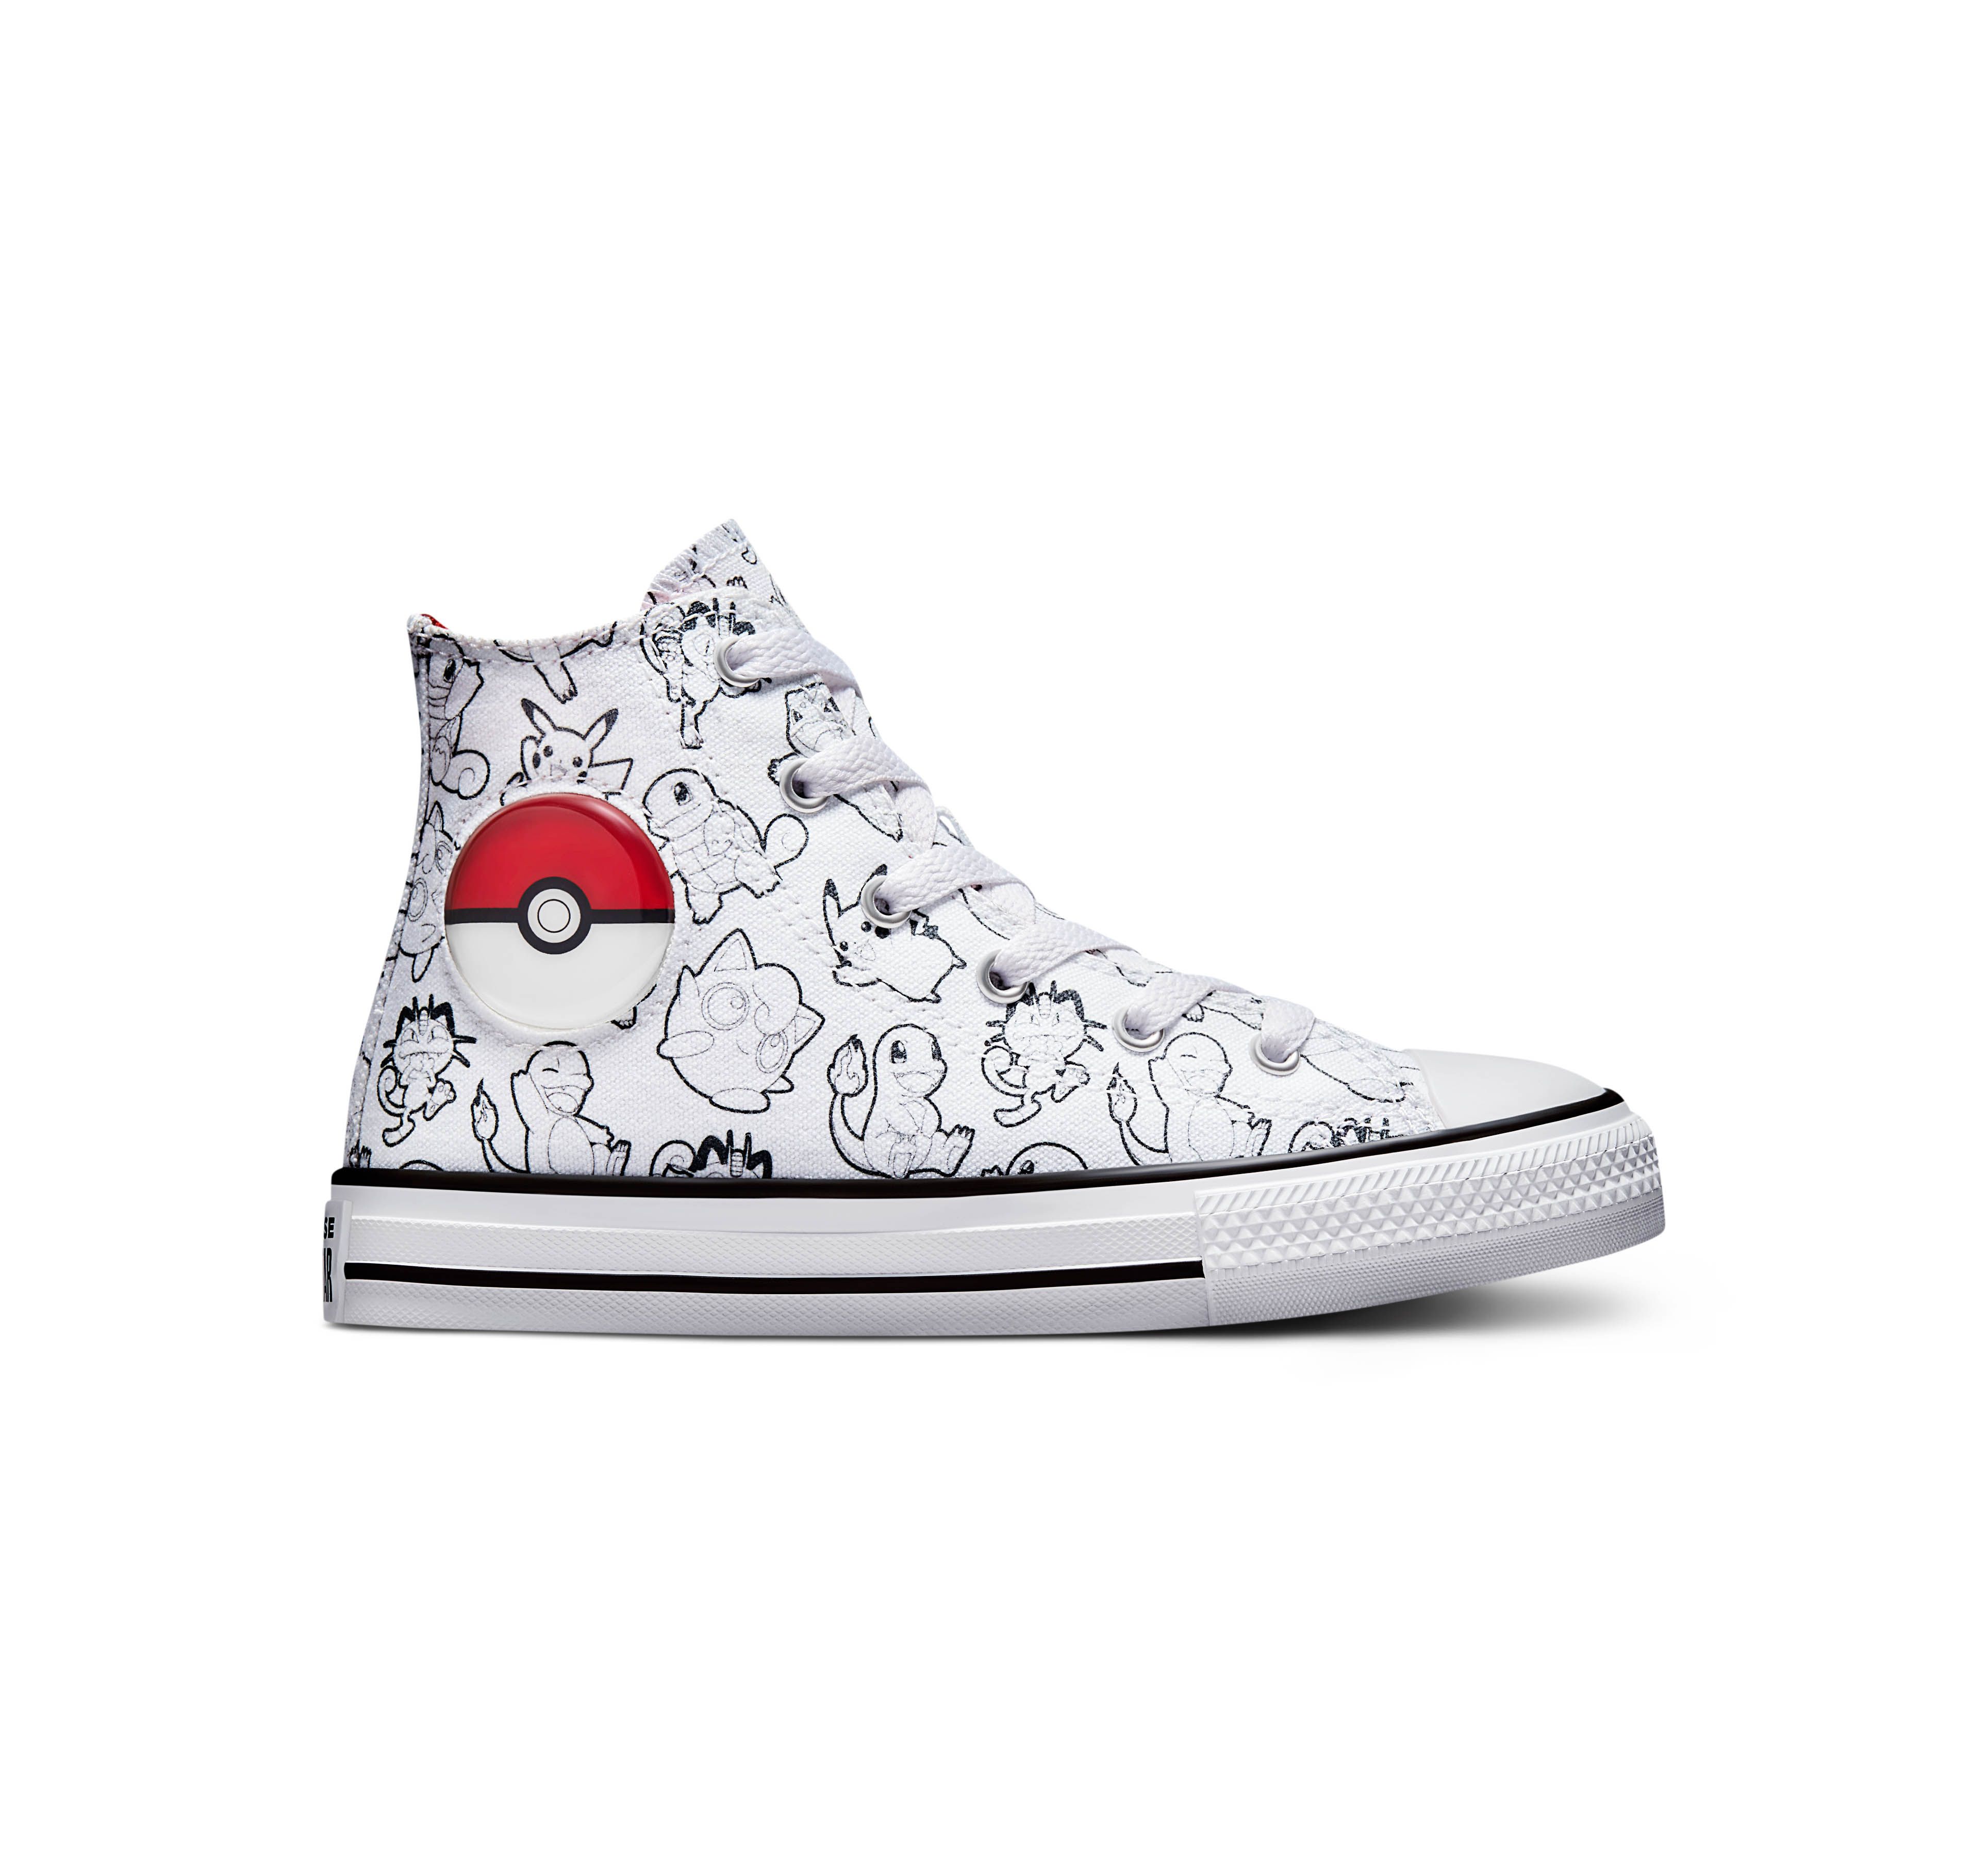 Pokémon and Converse Team Up for Shoe Collection